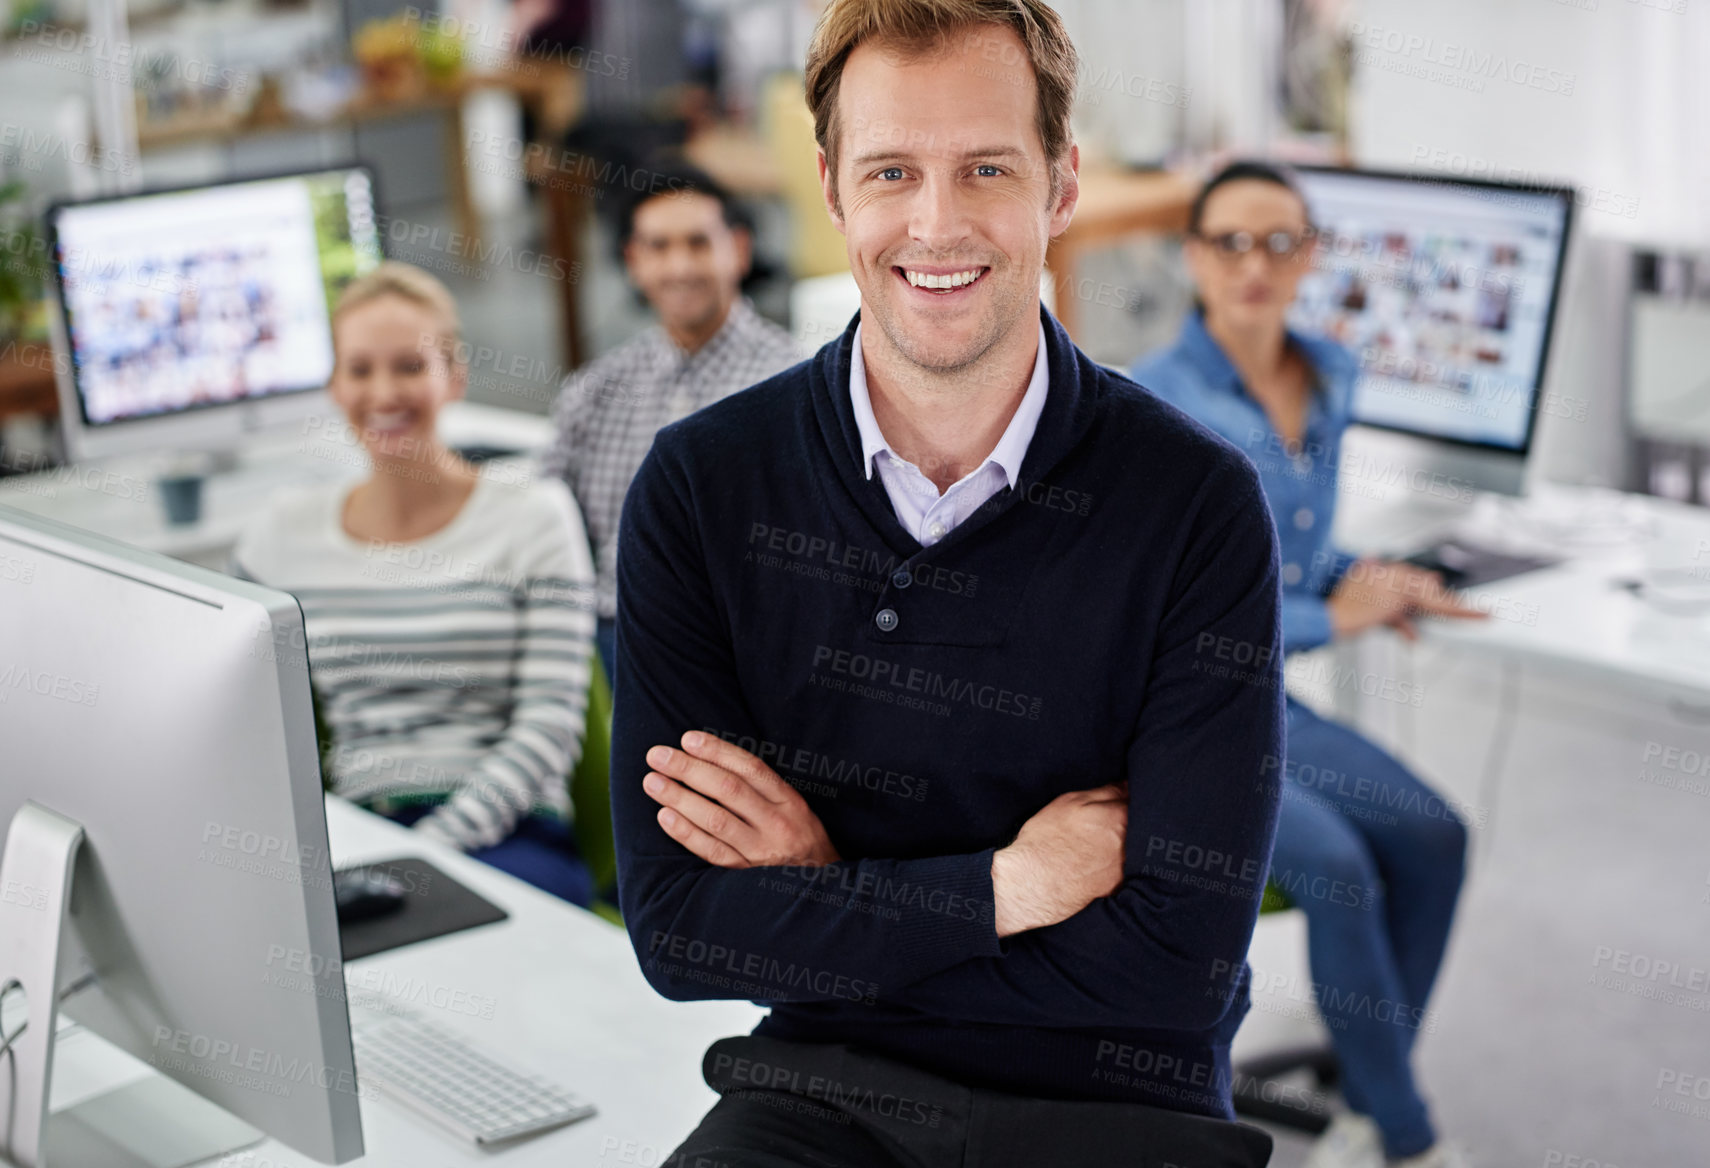 Buy stock photo Cropped portrait of a smiling businessman with his colleagues in the background